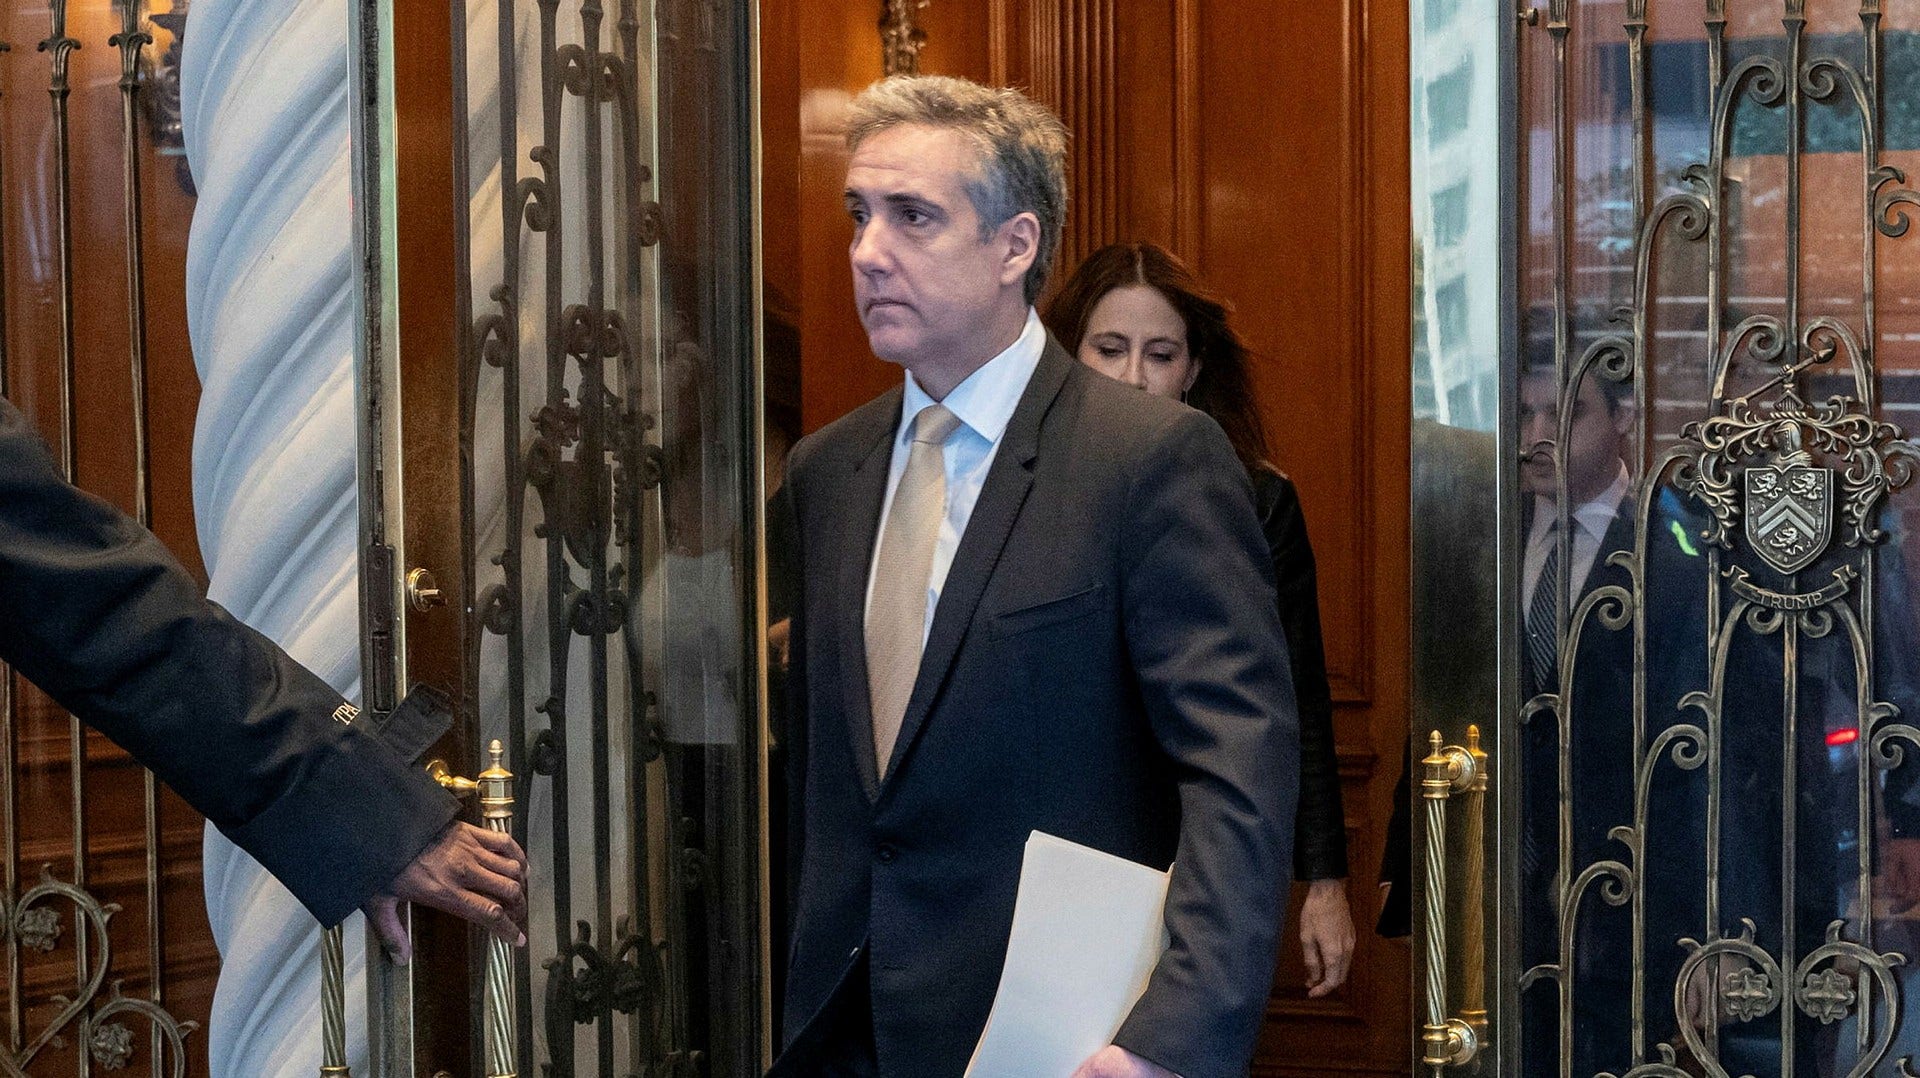 Michael Cohen, Trump's aide, continues to be questioned in a New York court.